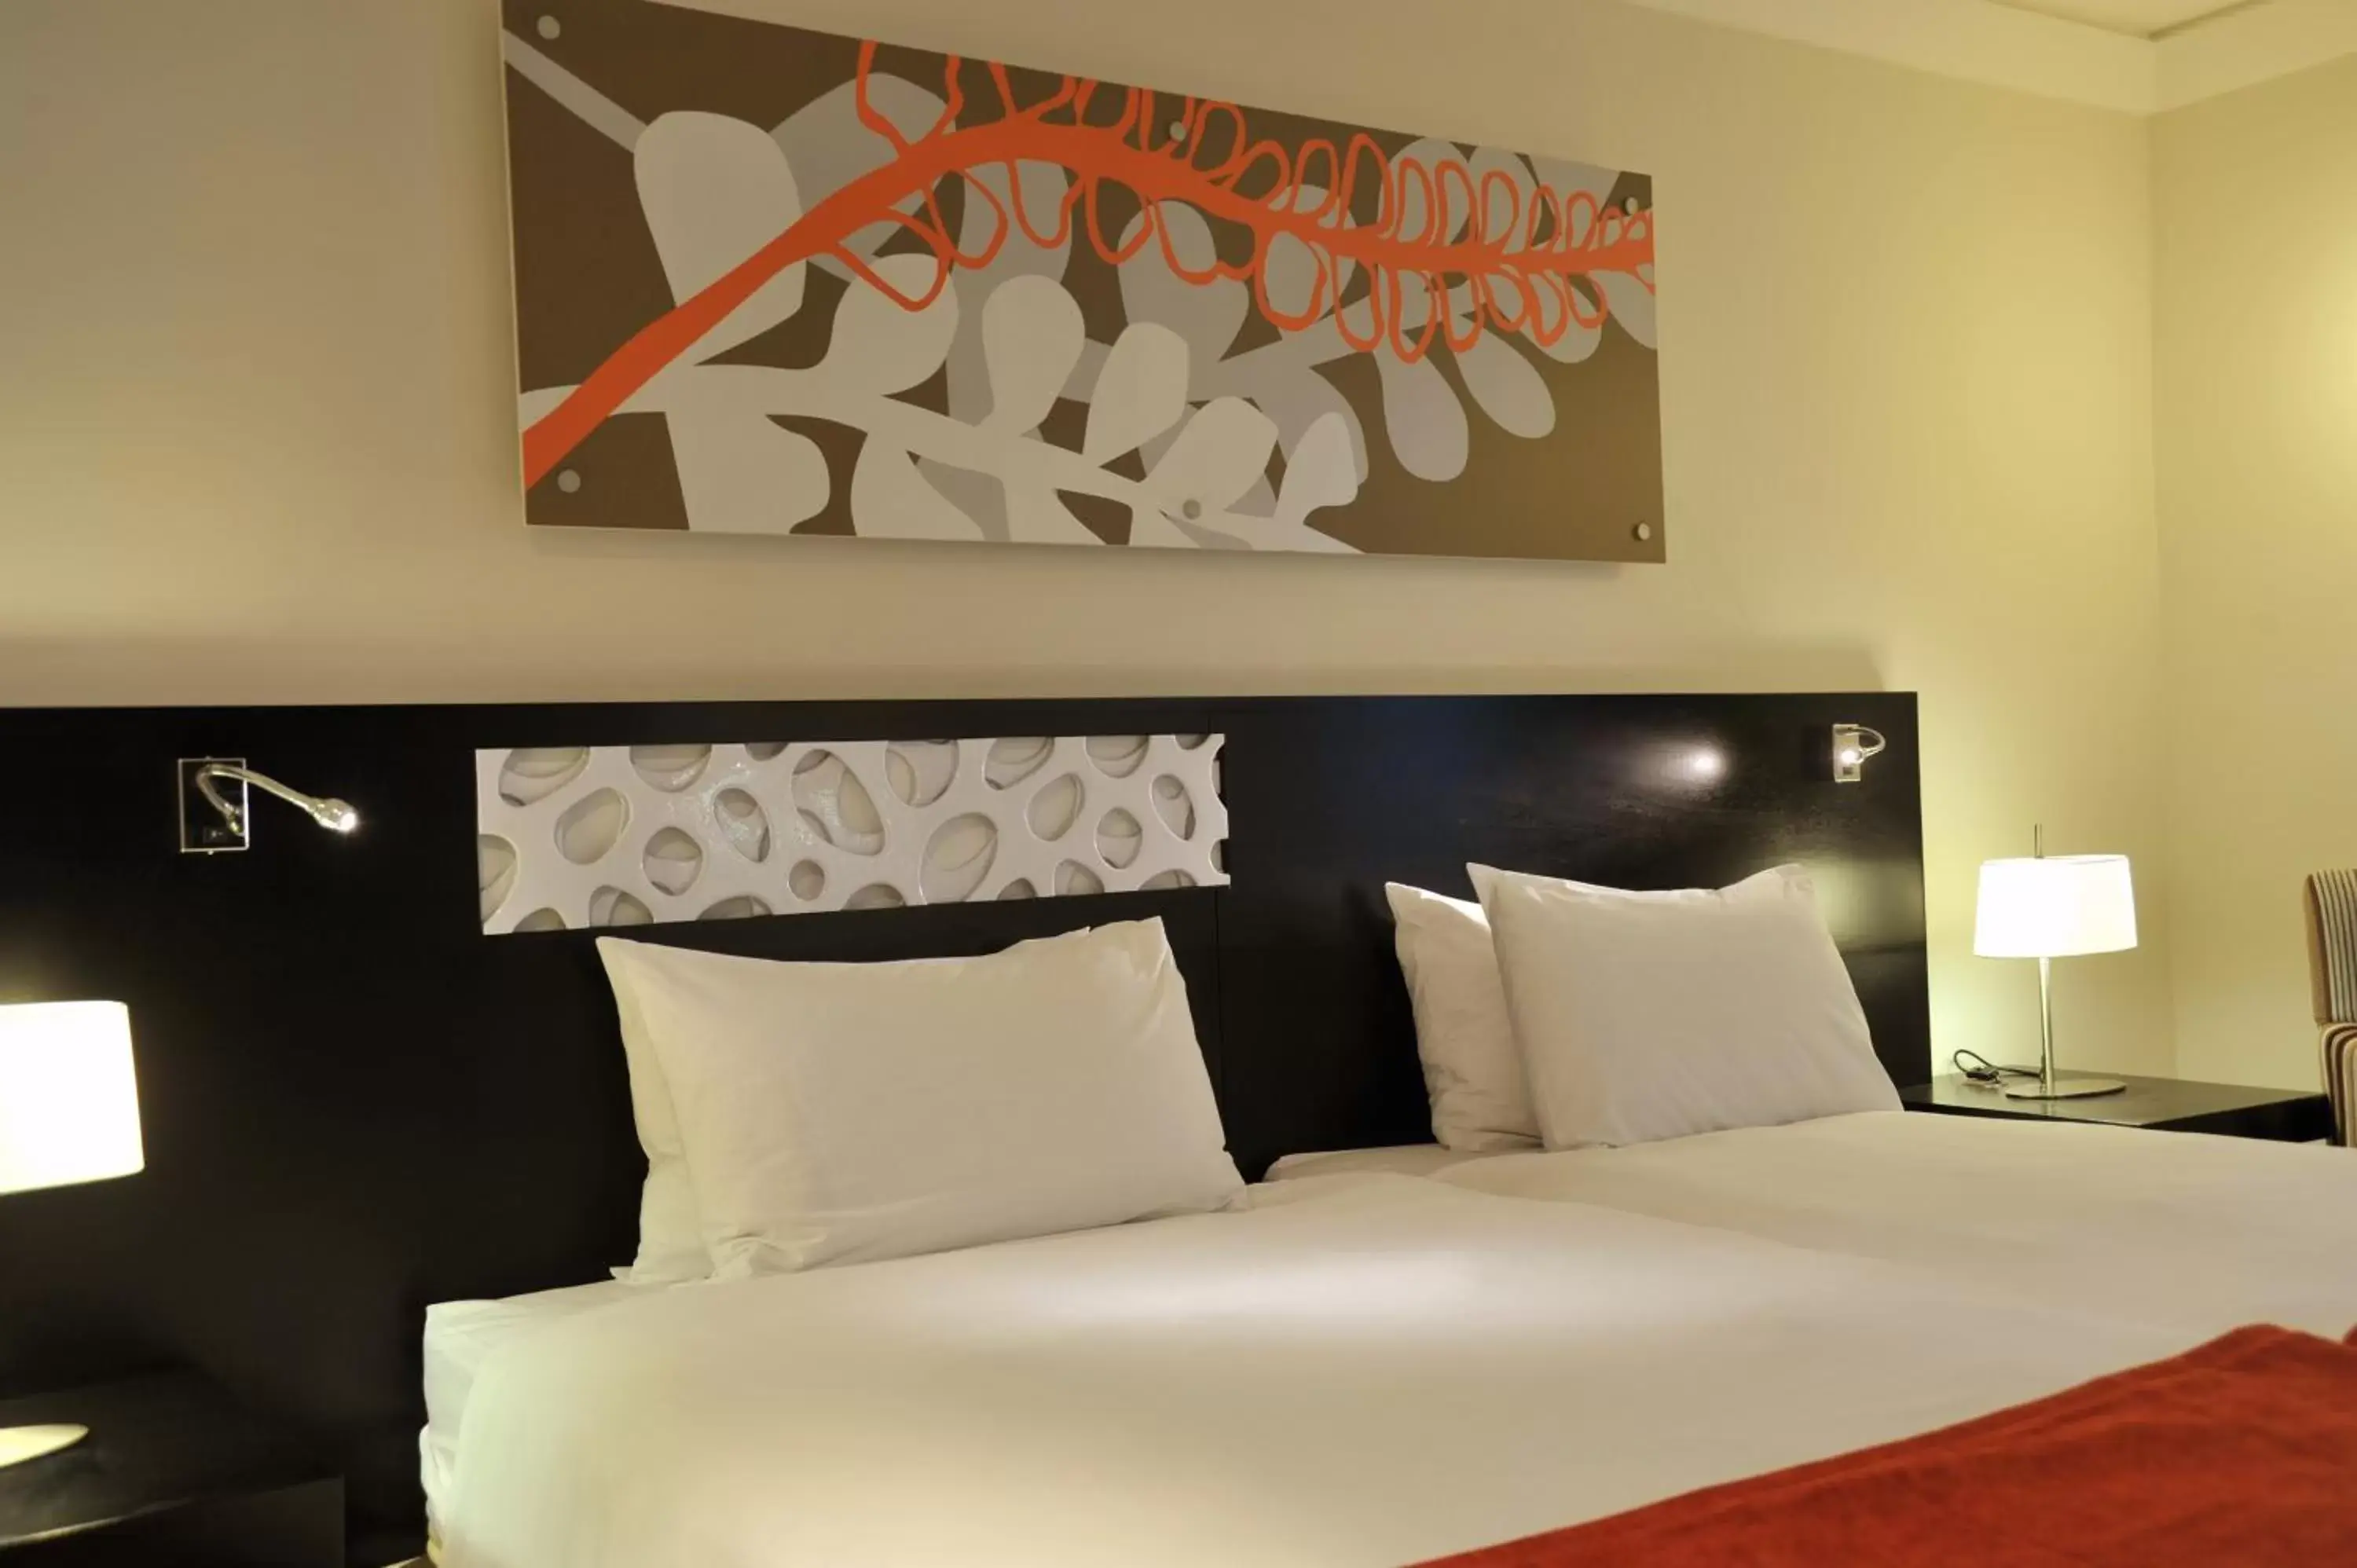 Bed in ONOMO Hotel Cape Town – Inn On The Square